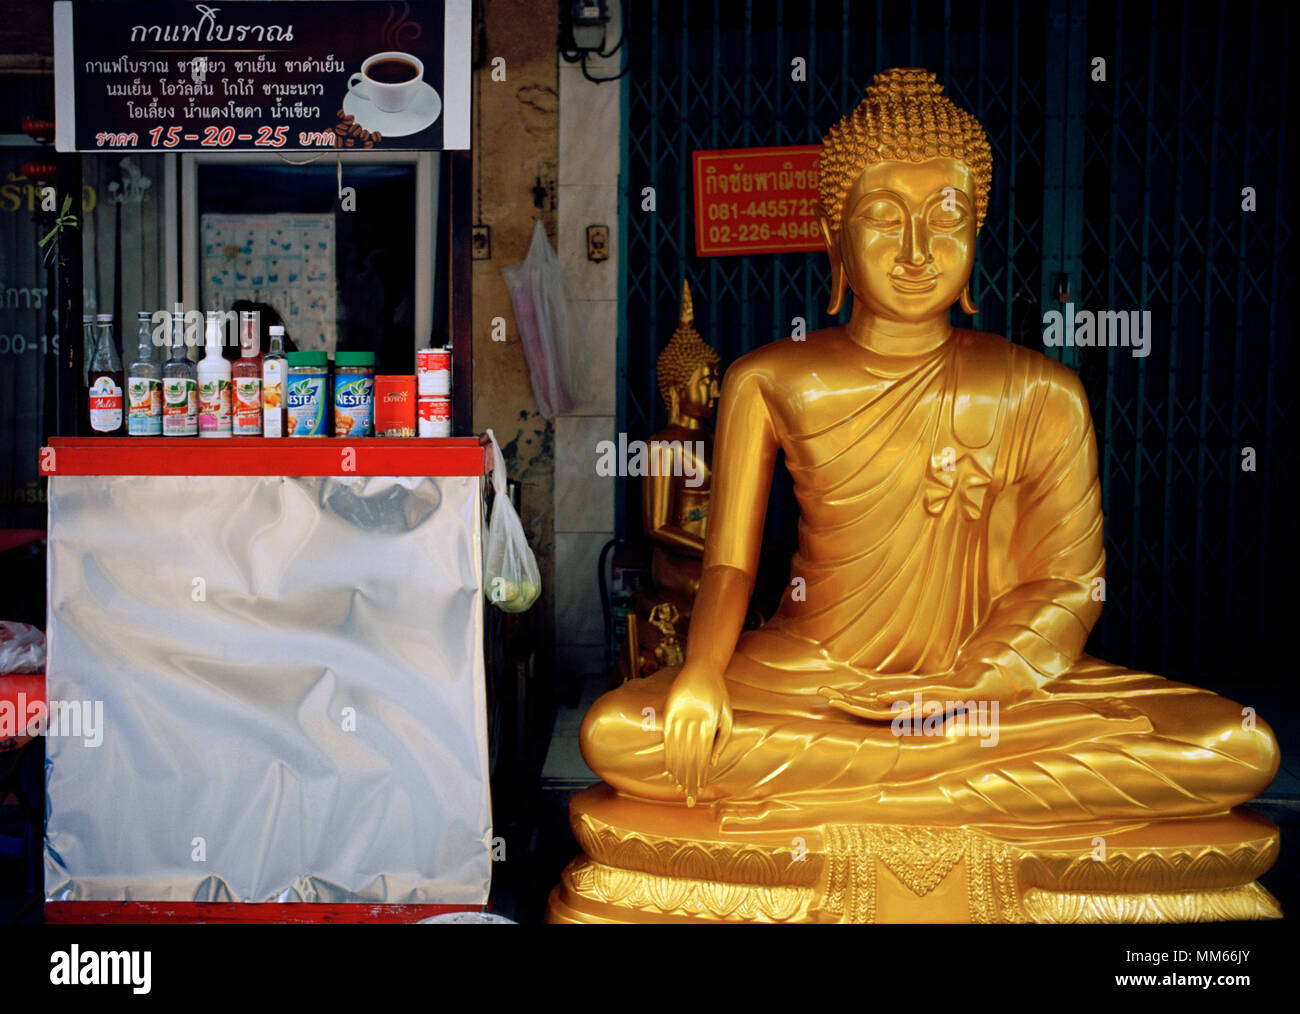 Thai Buddhism - Buddha statue art for sale in Bamrung Muang Road in Bangkok in Thailand in Southeast Asia Far East. Buddhist Serenity Serene Travel Stock Photo